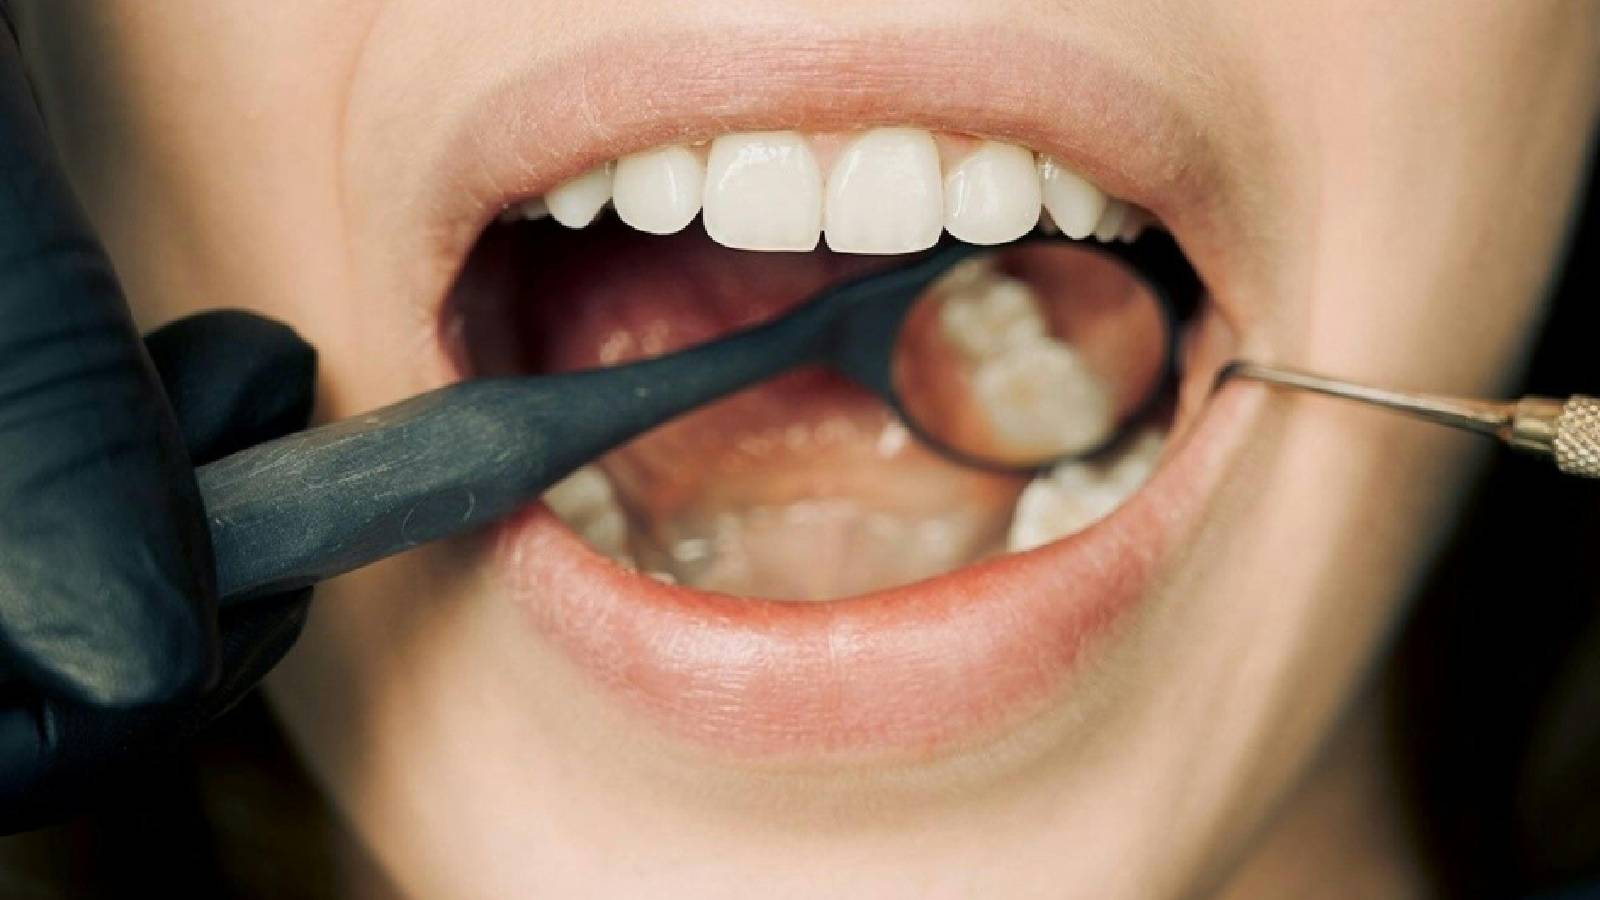 Oil pulling can turn around your dental health! Here’s how